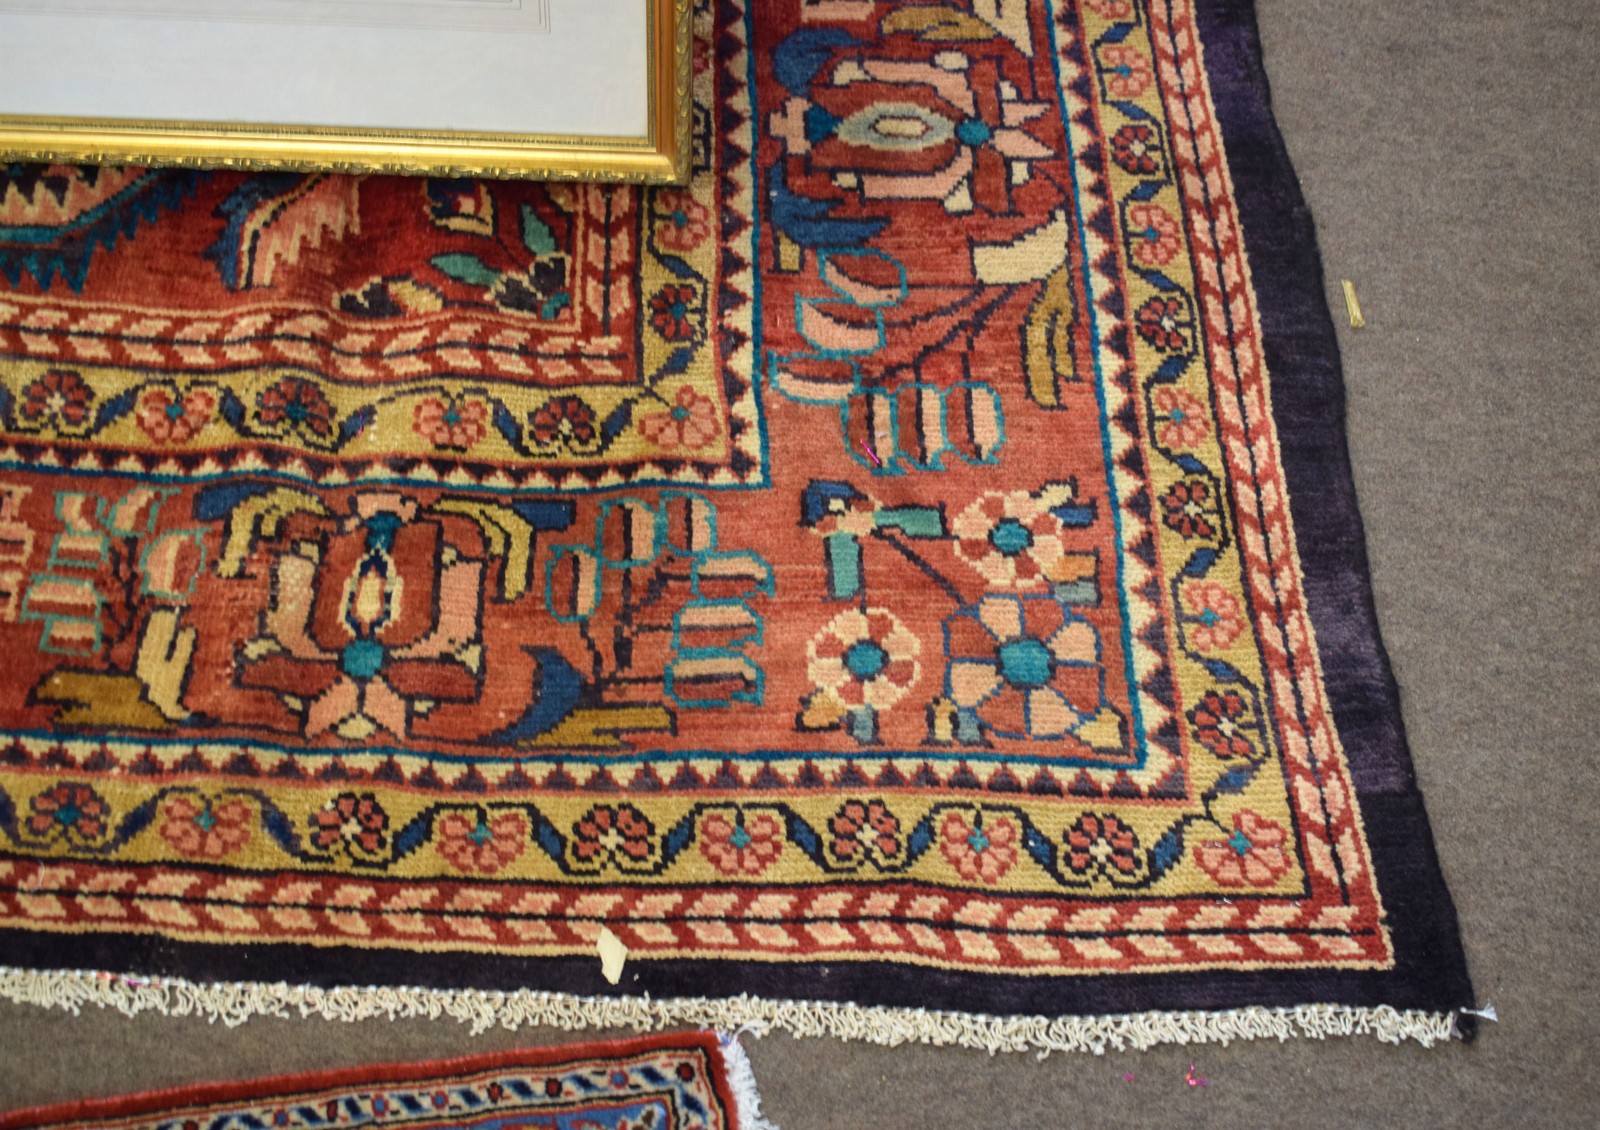 Modern Caucasian carpet^ central panel of geometric floral designs and stylised animals etc^ - Image 2 of 3